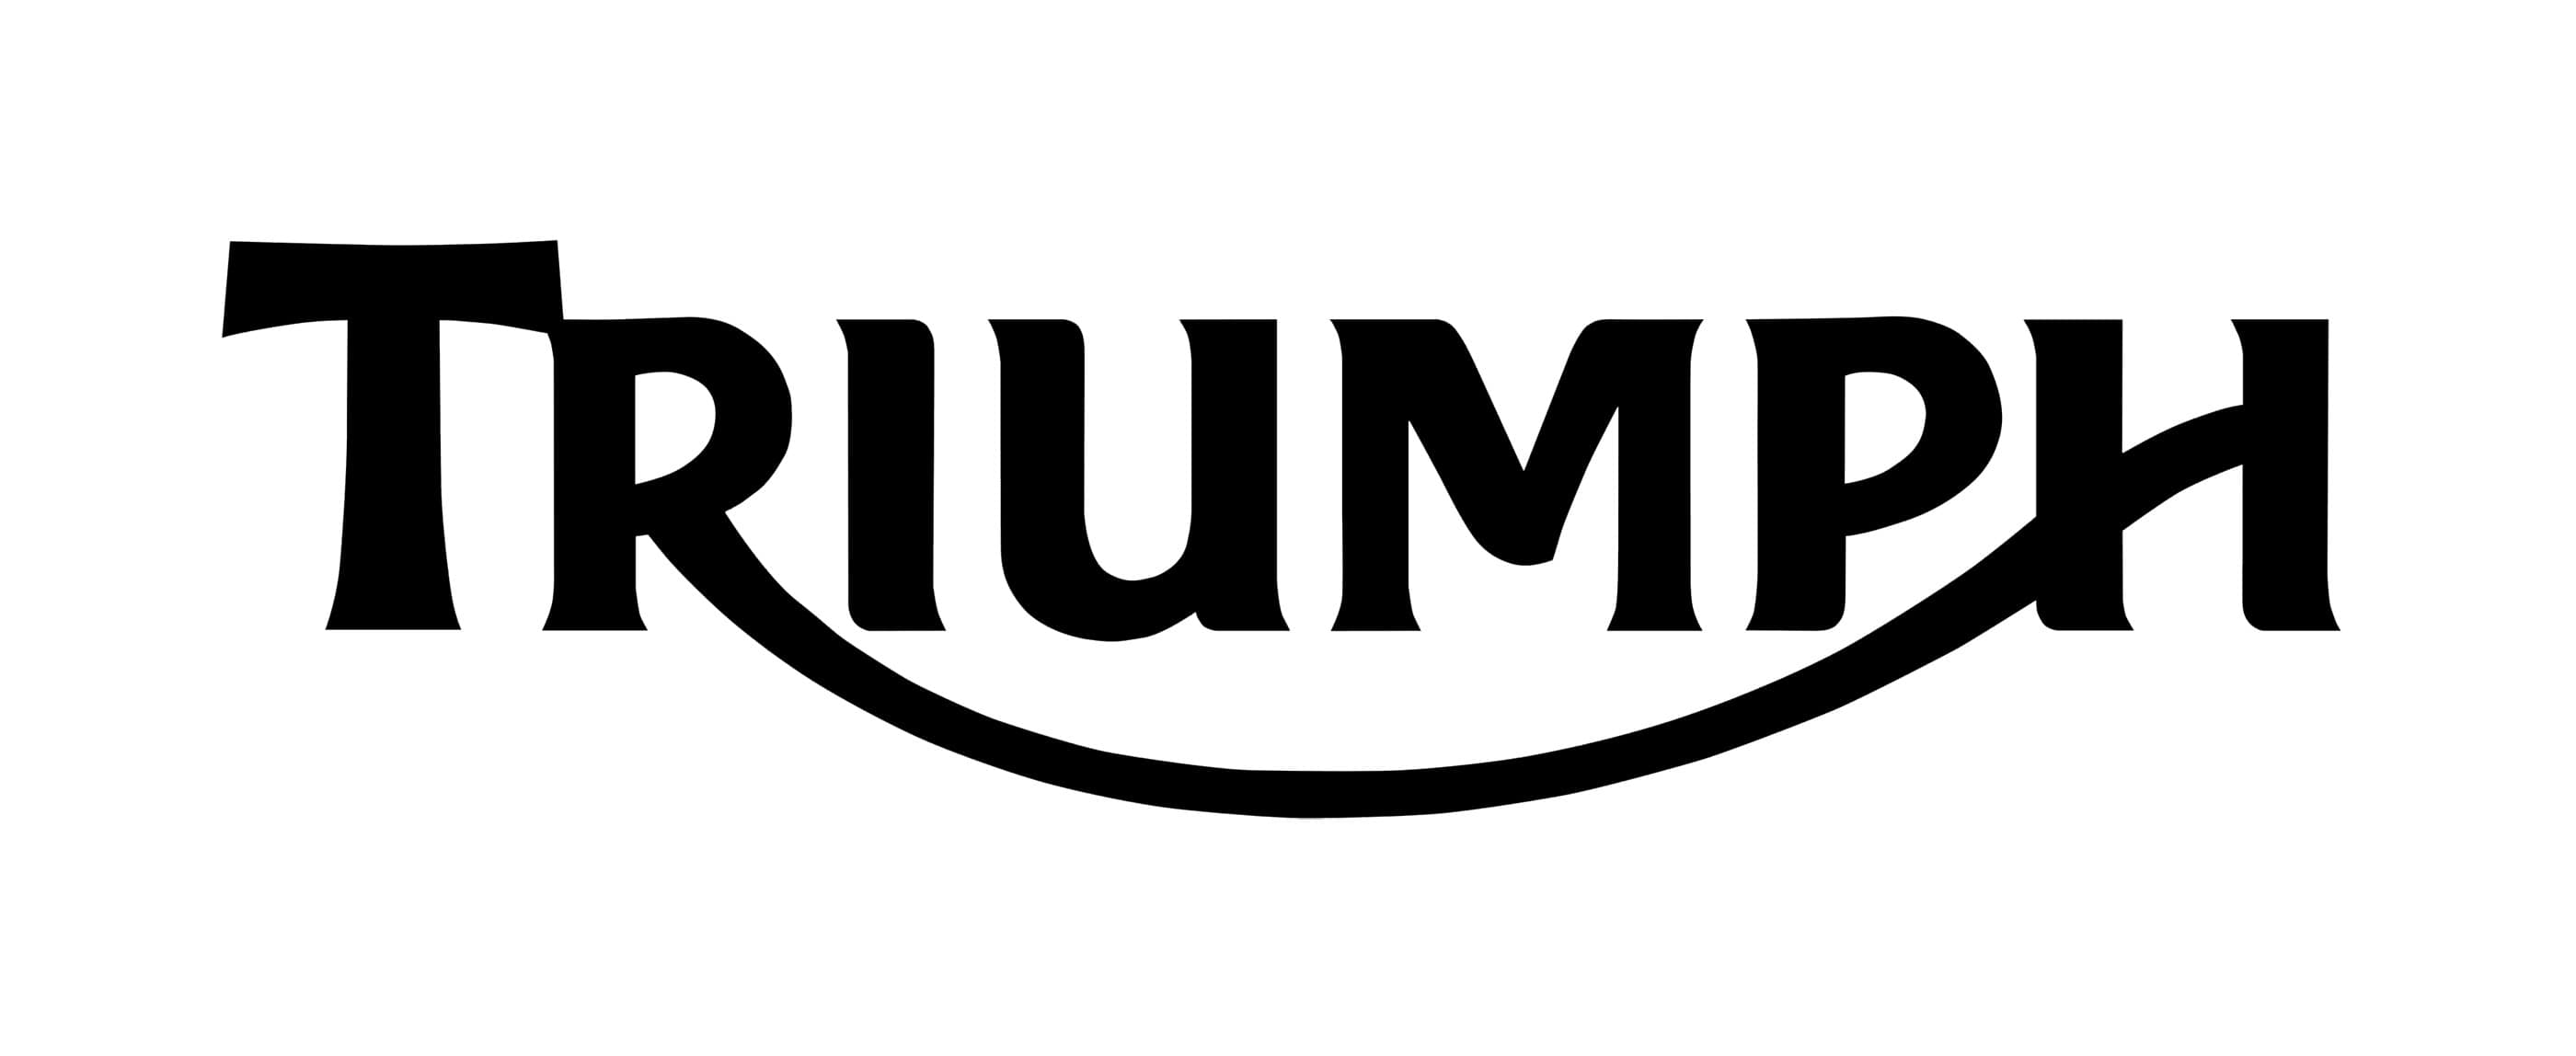 Motorcycle Company Logo - Triumph logo: history, evolution, meaning | Motorcycle Brands